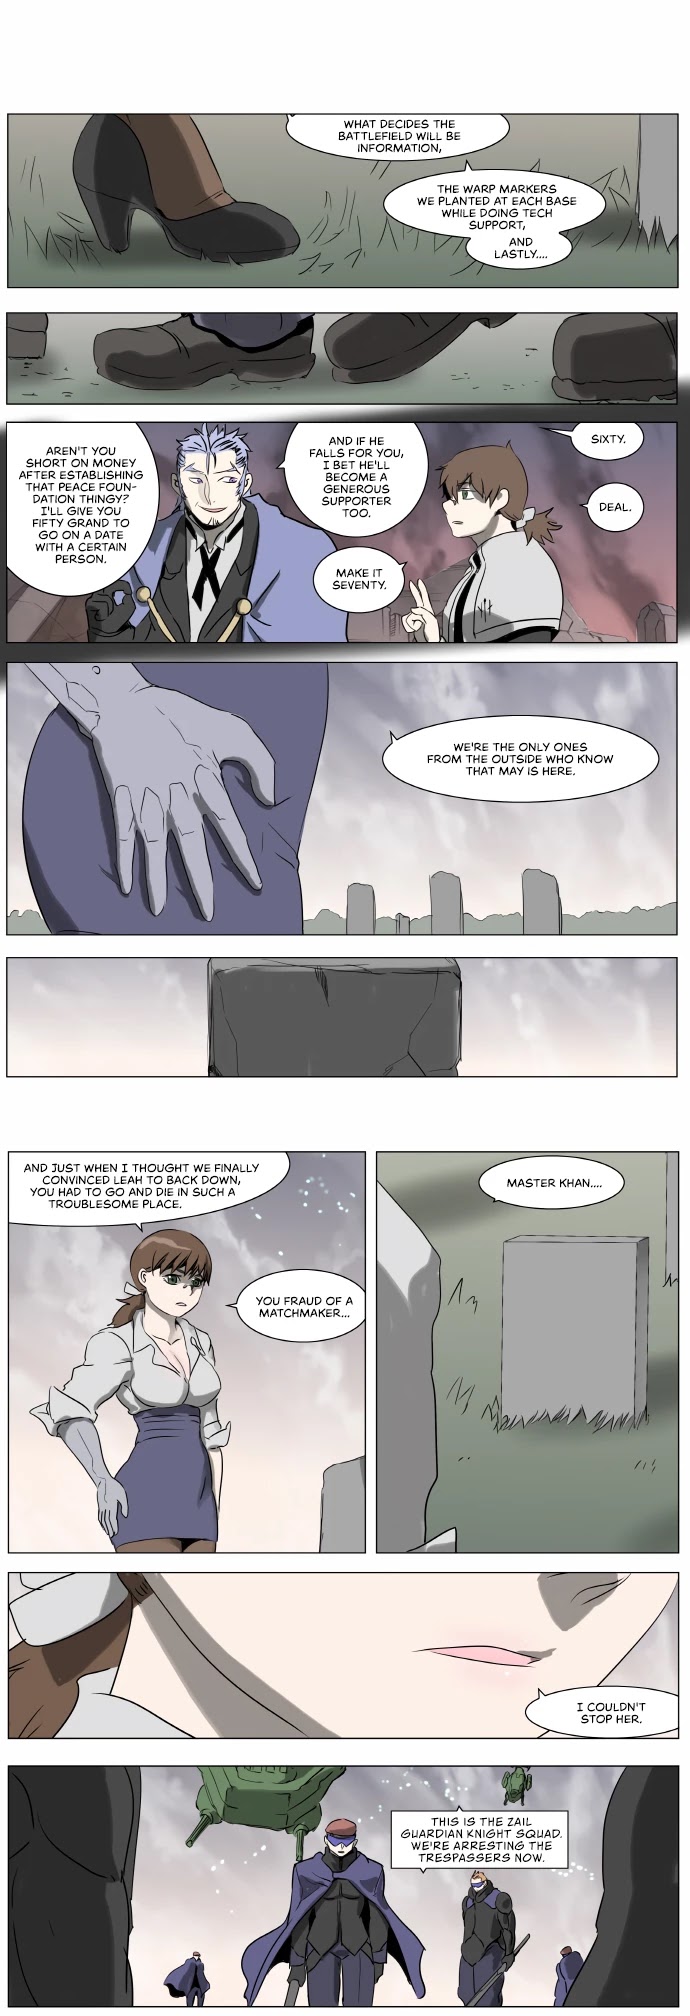 Knight Run Chapter 218: Knight Fall - Part 22 | Aegis - Picture 1